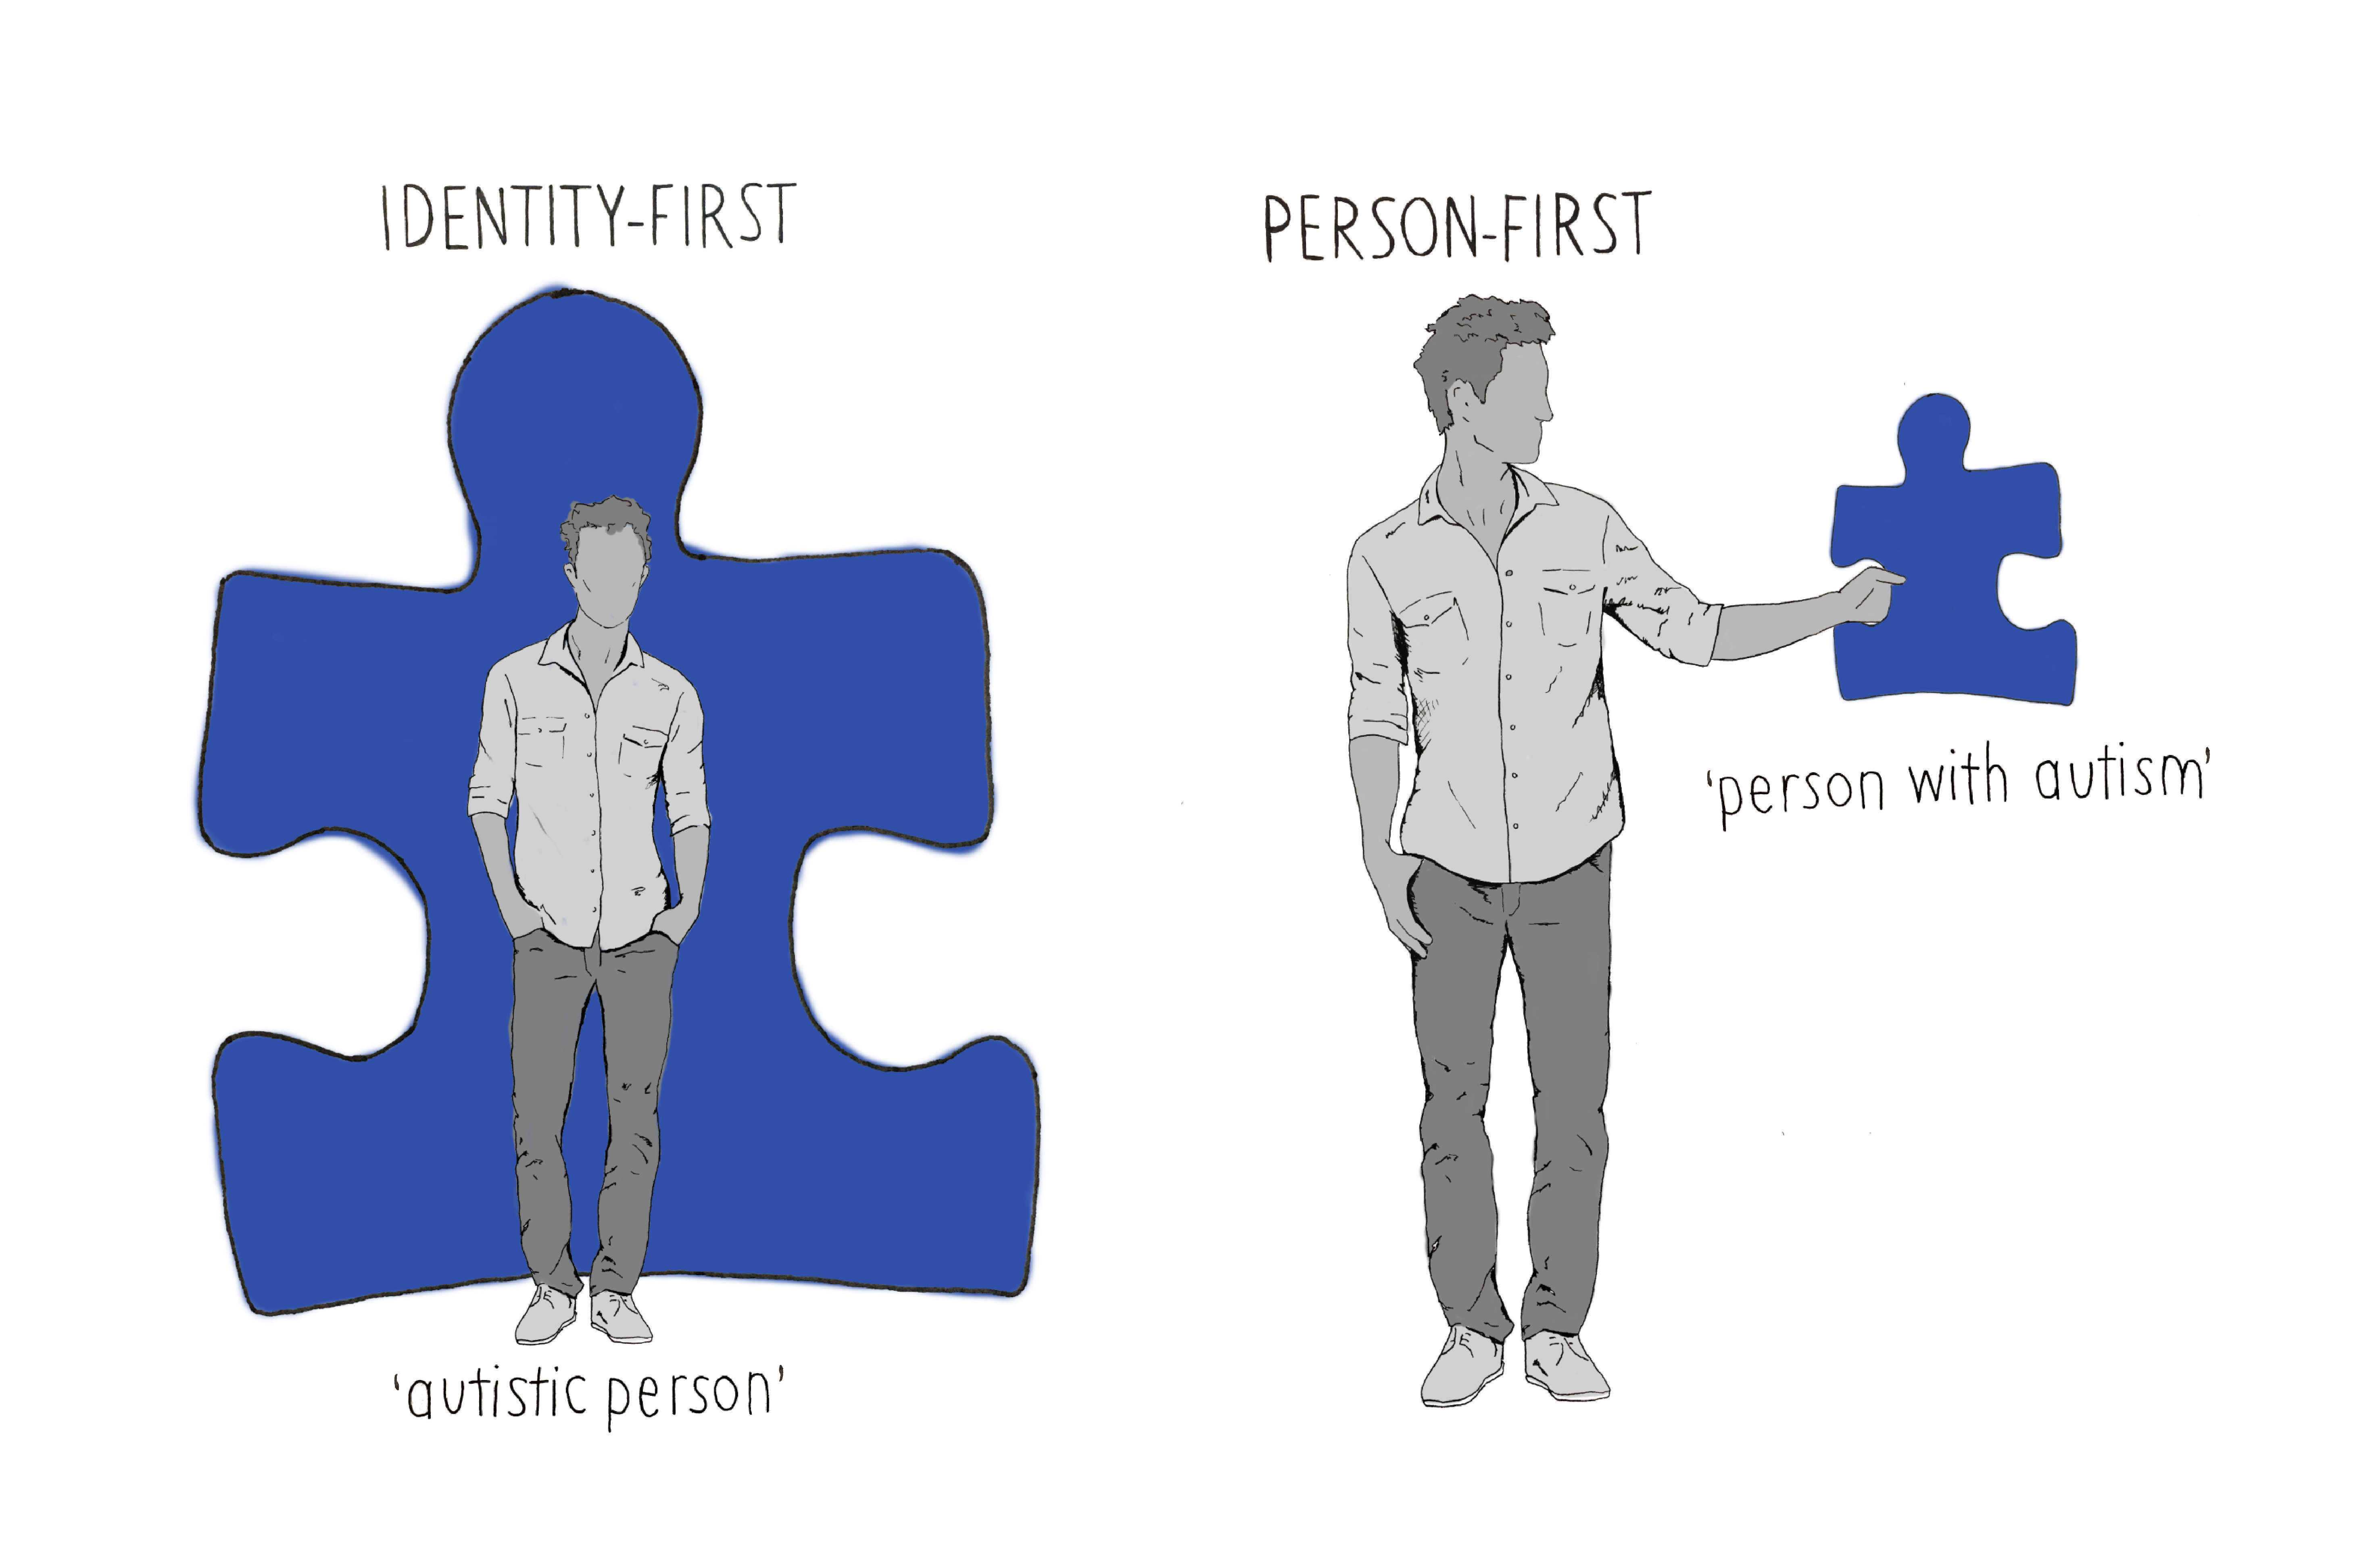 Do autistic people prefer person first?